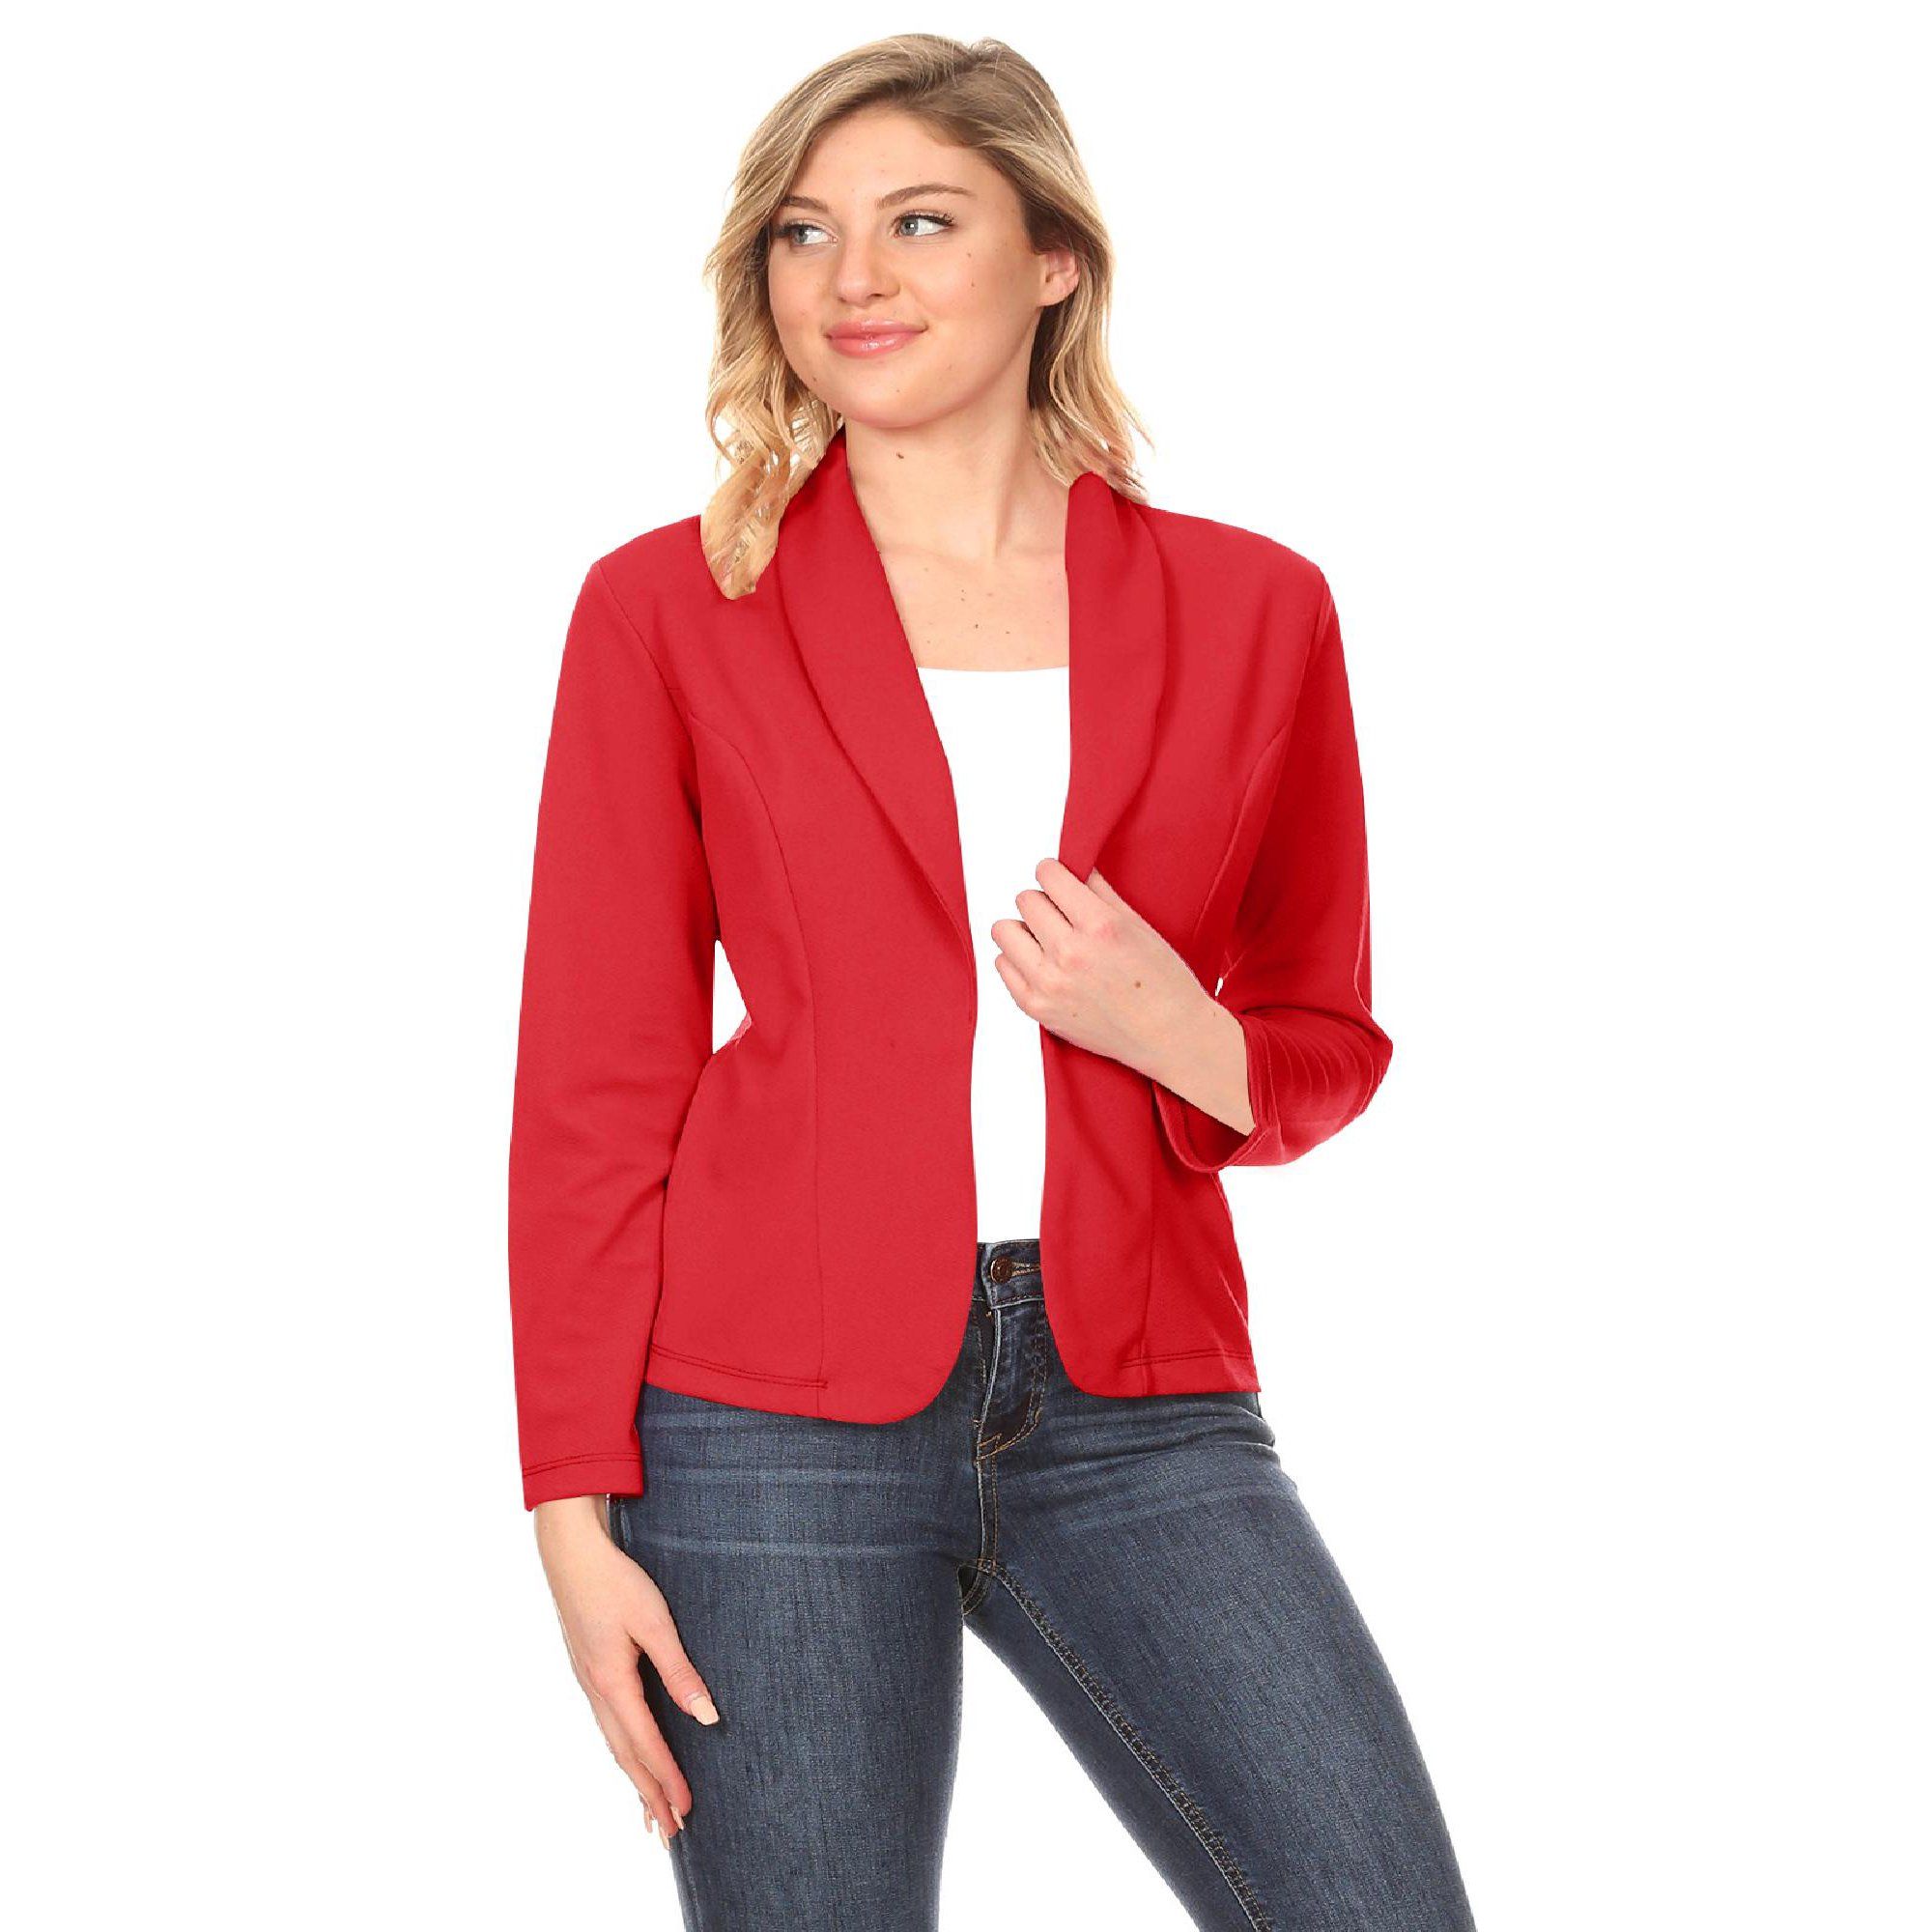 Women's Solid Casual Office Work Long Sleeve Open Front Blazer Jacket Made in USA S-3XL | Walmart (US)